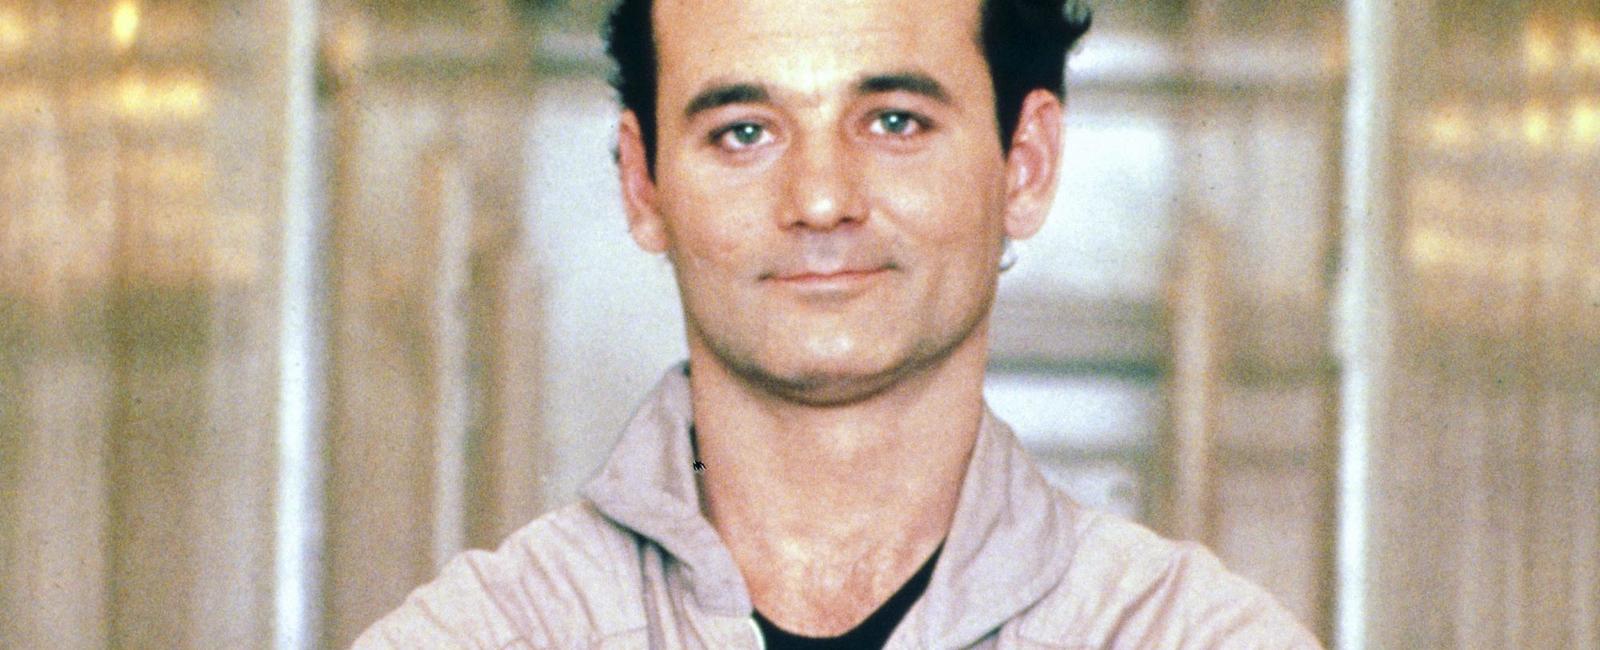 Bill murray was arrested when he was 20 for trying to bring 10 pounds of marijuana on a plane